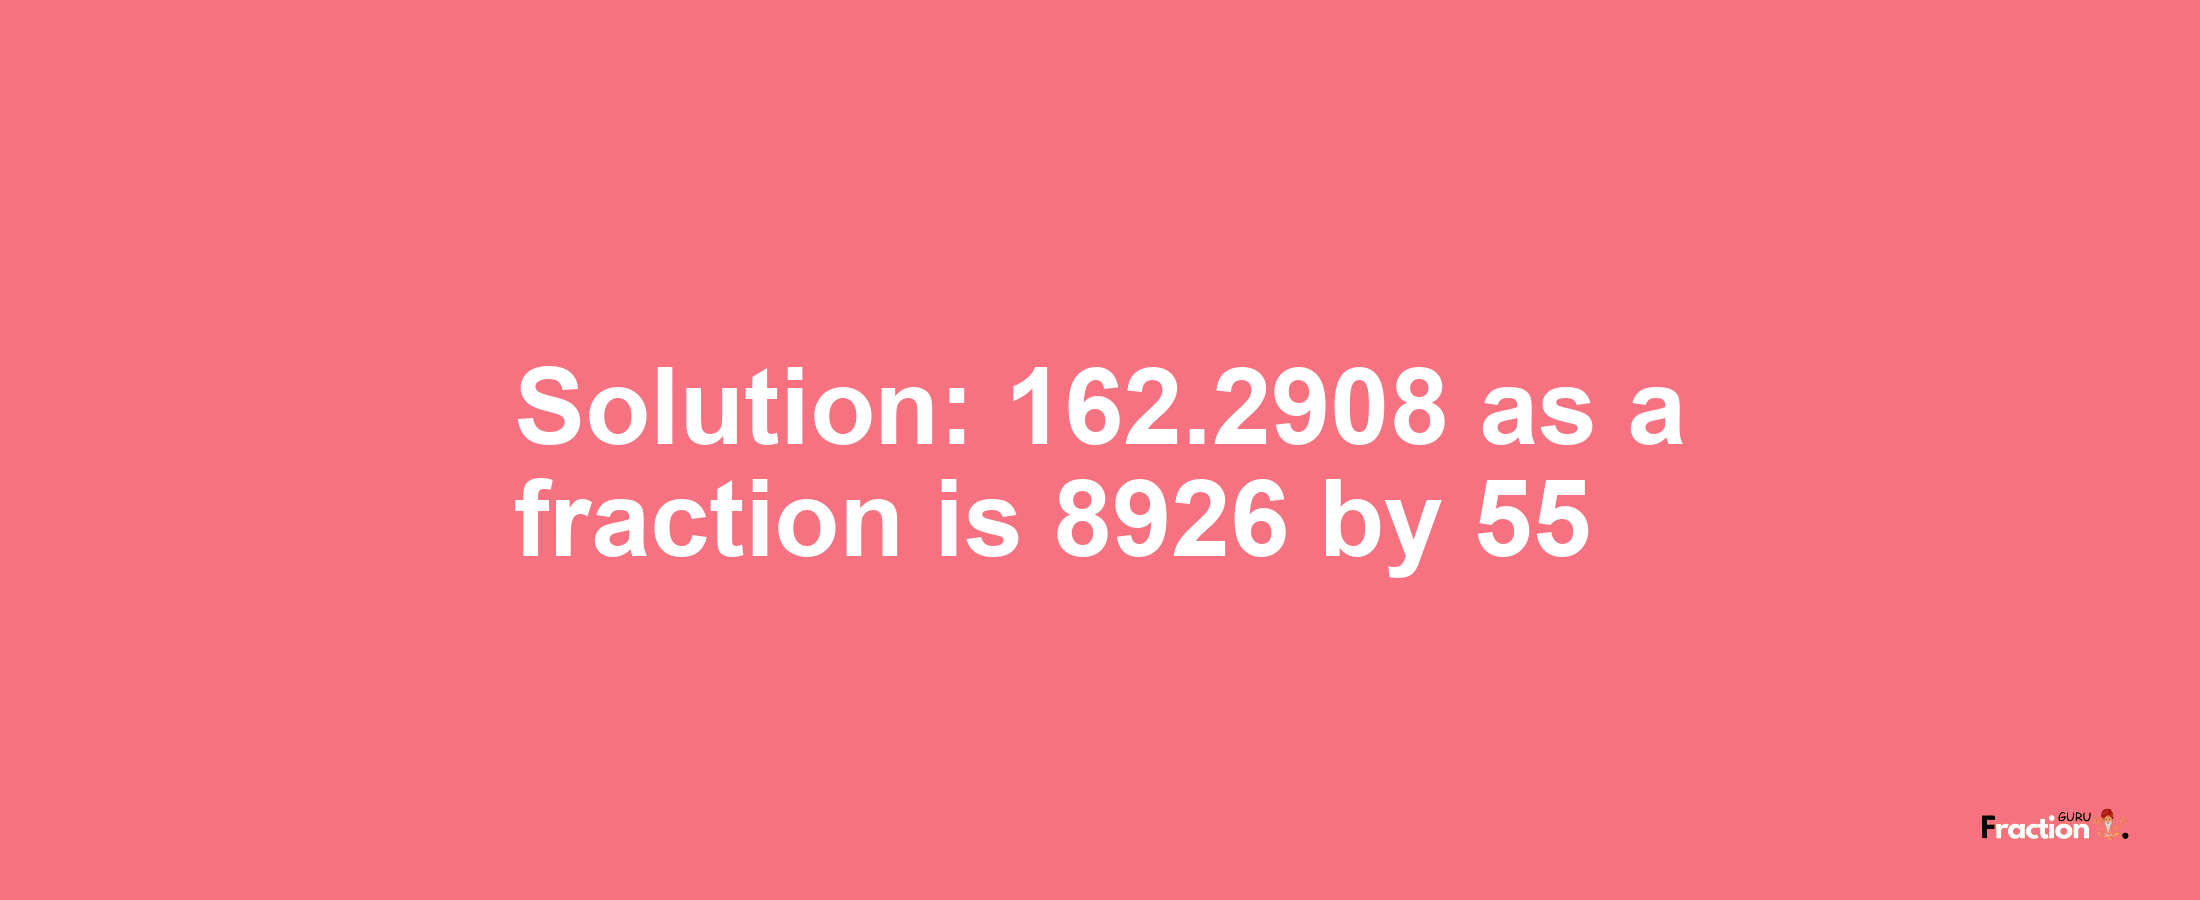 Solution:162.2908 as a fraction is 8926/55